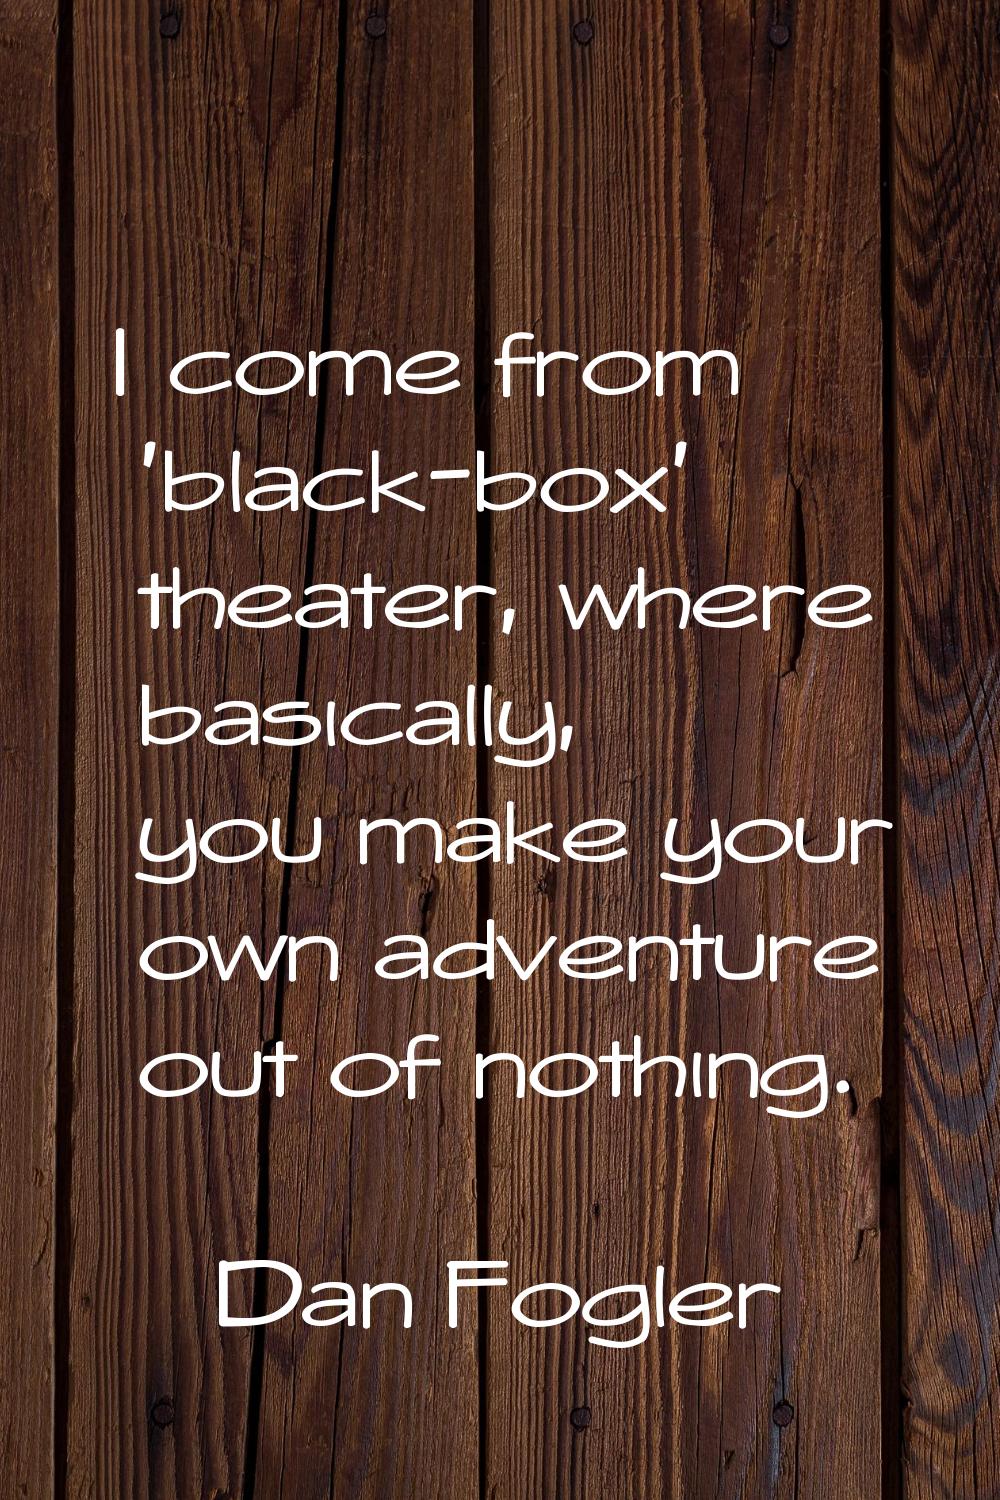 I come from 'black-box' theater, where basically, you make your own adventure out of nothing.